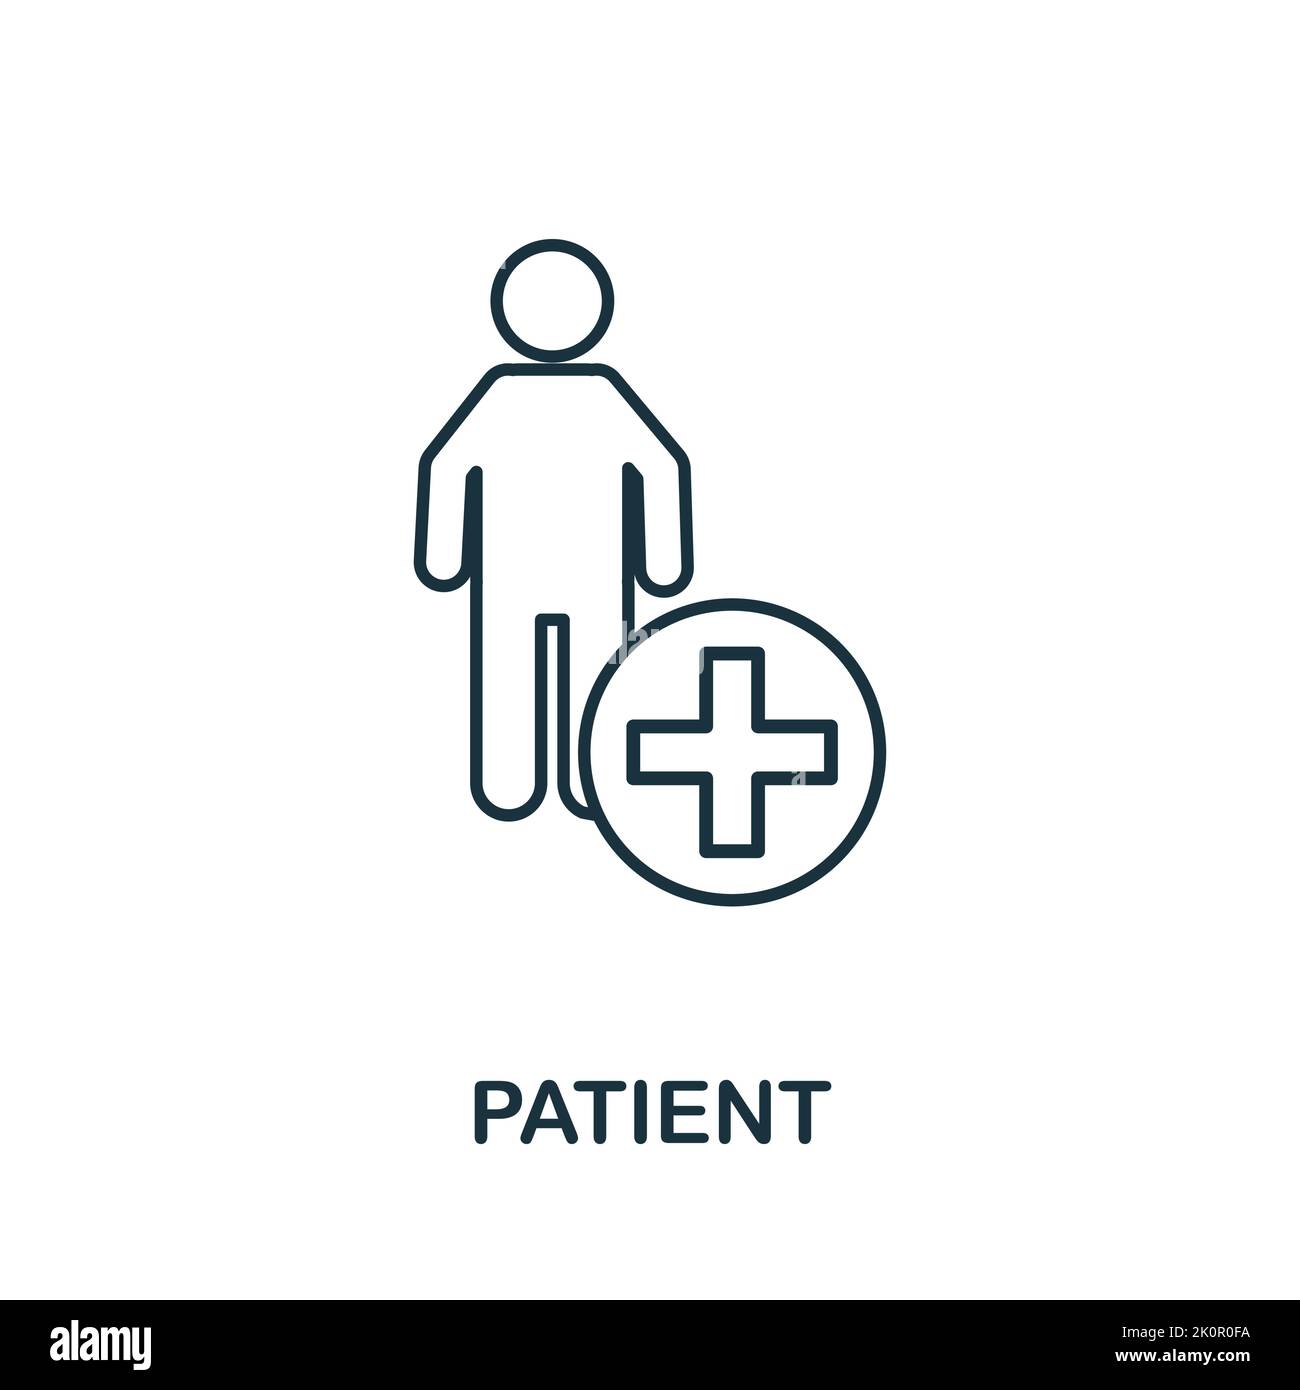 Patient icon. Monocrome element from medical services collection. Patient icon for banners, infographics and templates. Stock Vector